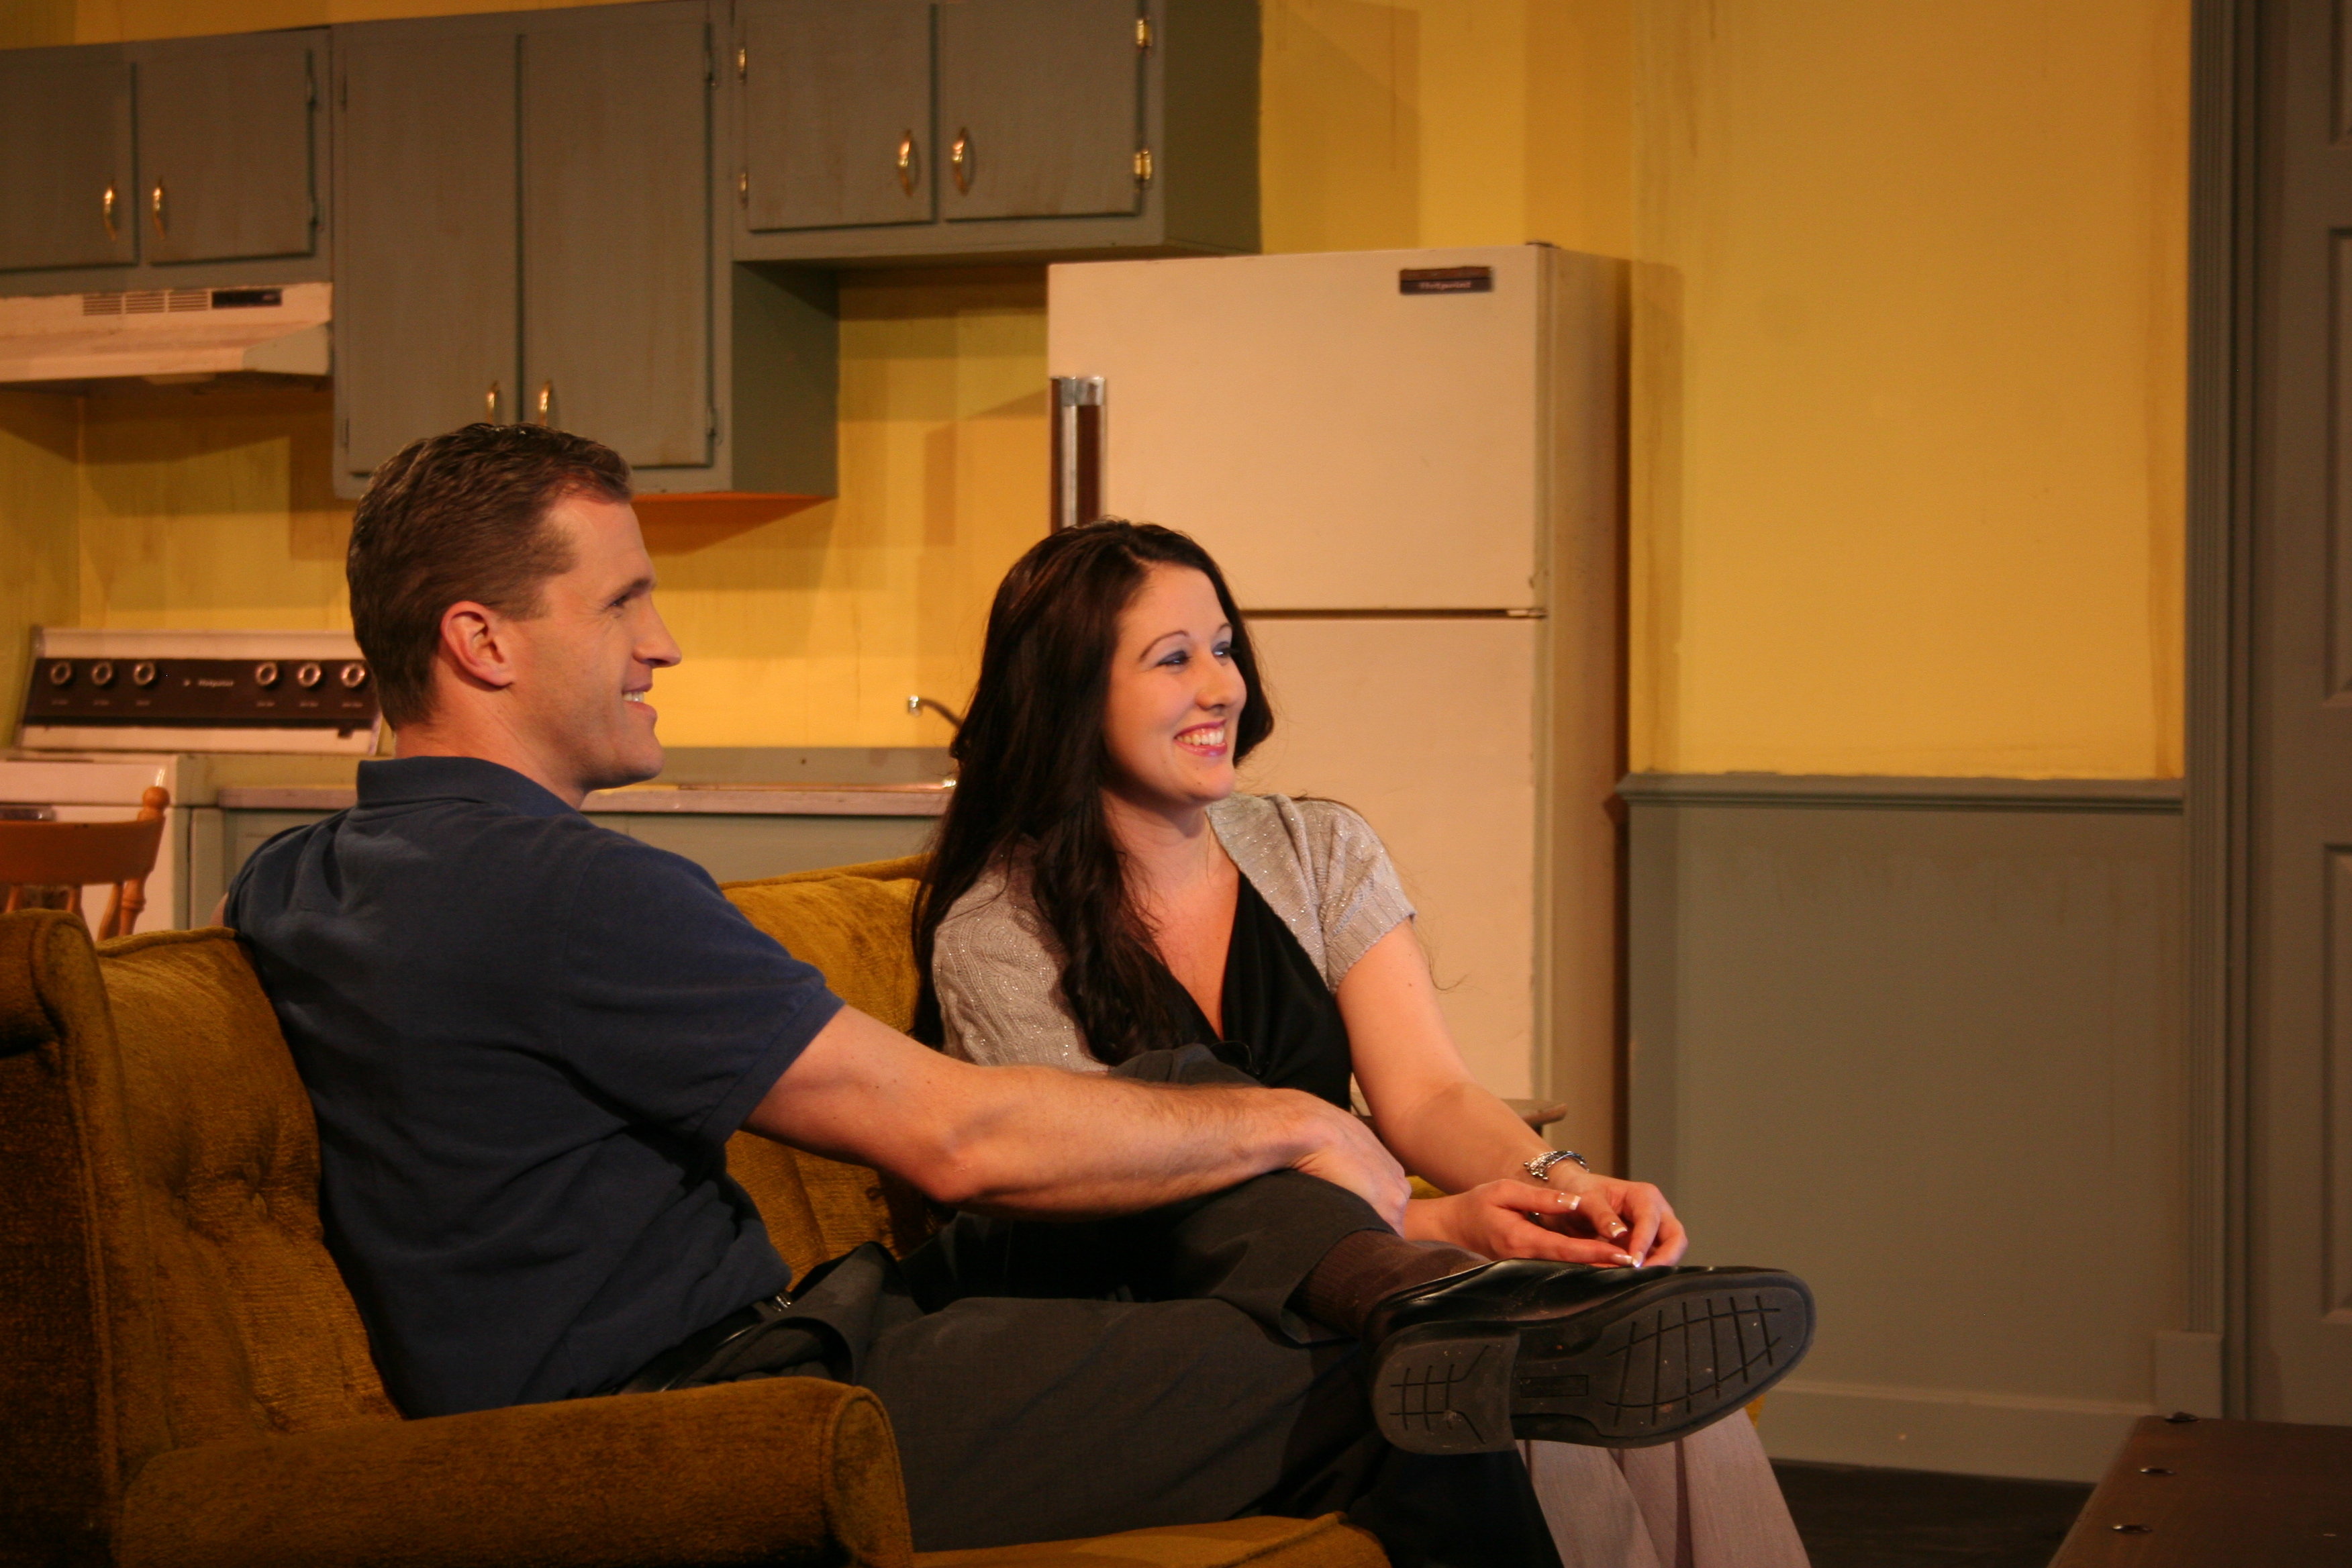 Barry Ellenberger and Shannon Denton-Brown between takes.